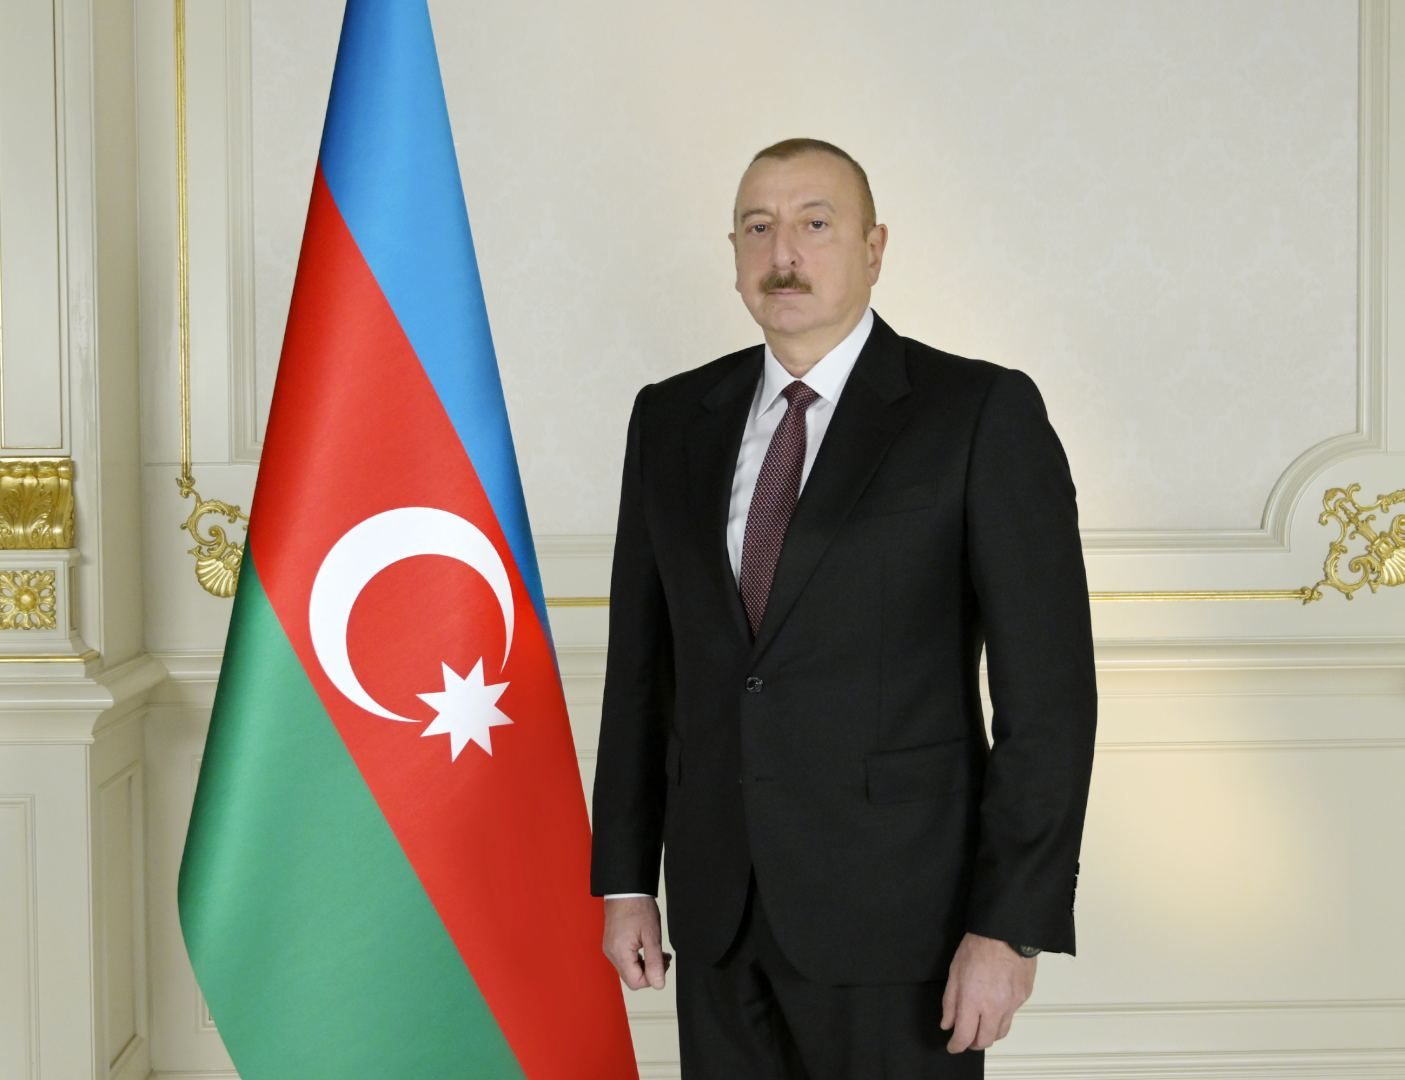 President Ilham Aliyev offers condolences to Russian politician's families, friends